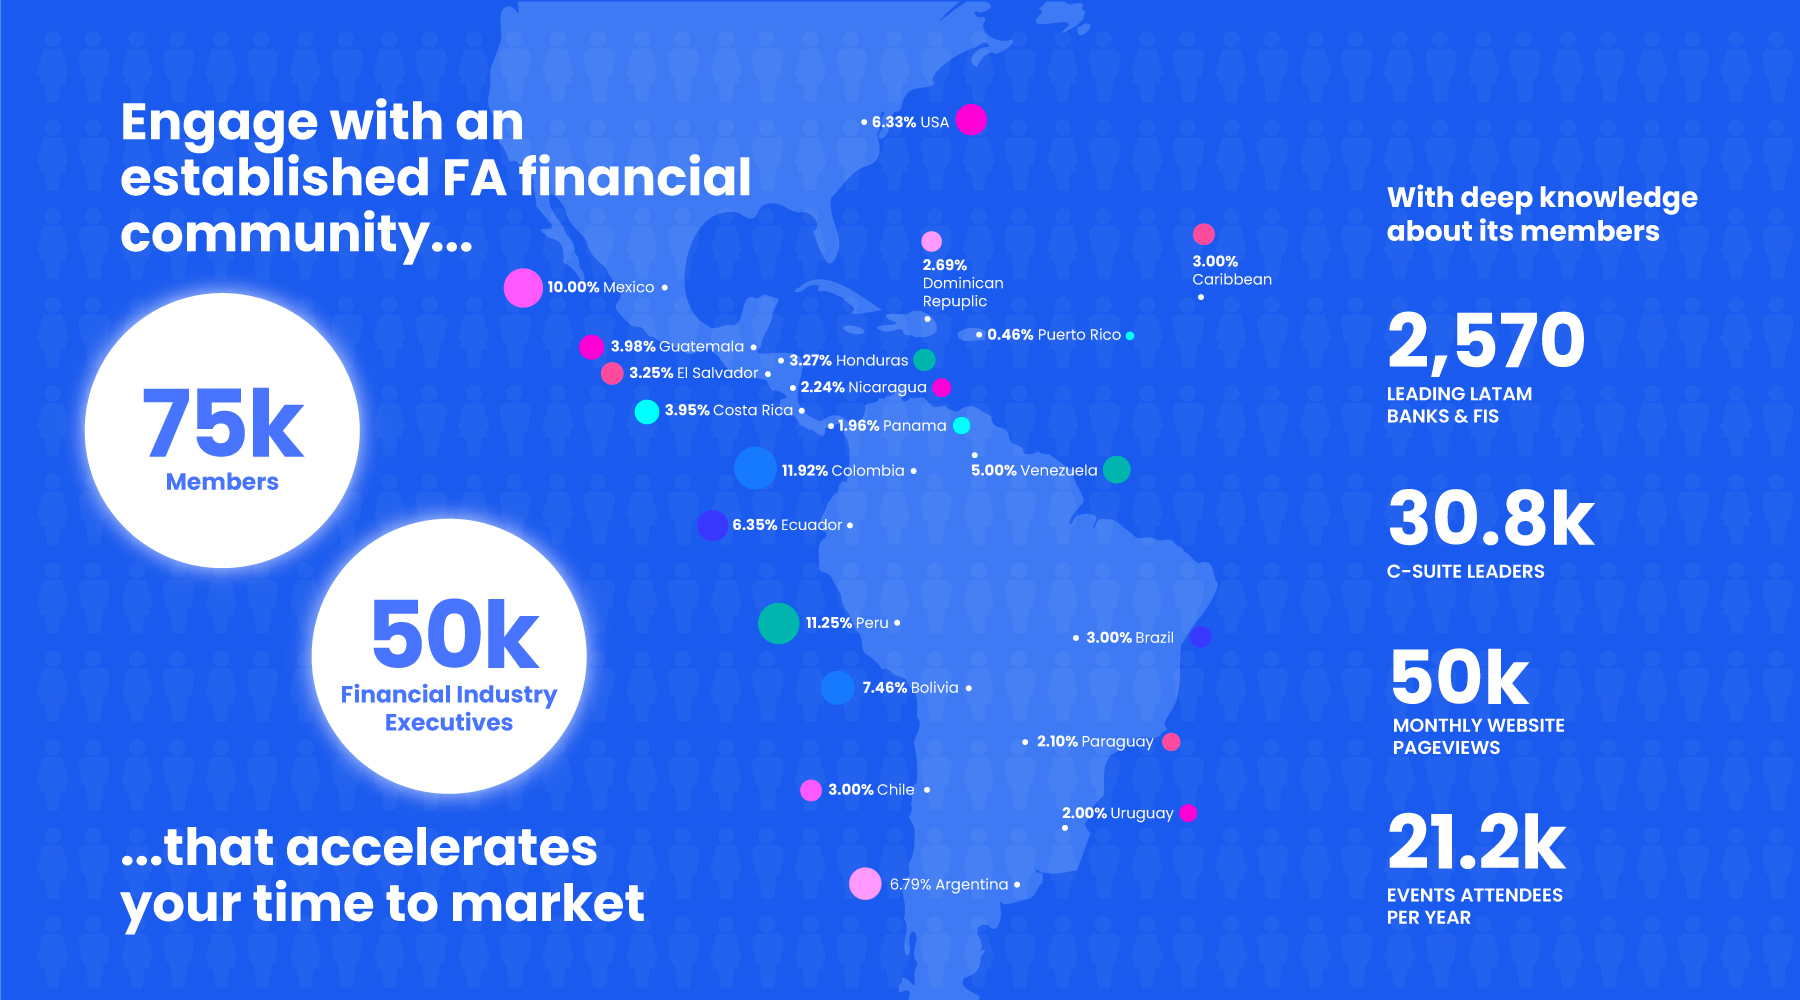 Engage with an established FA financial community